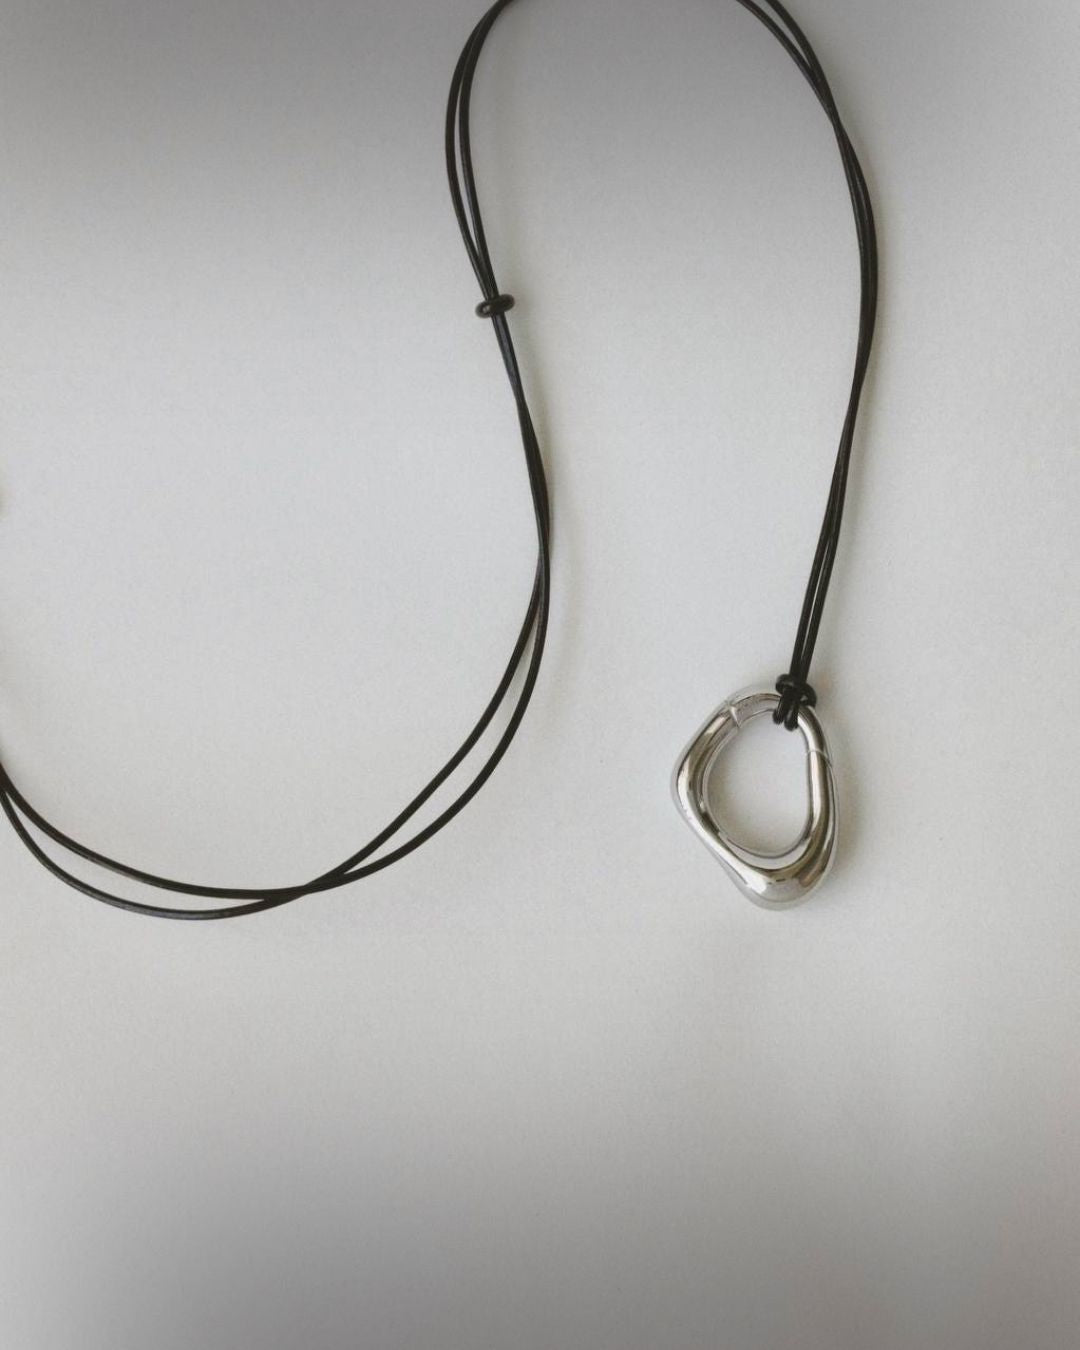 Momentum Necklace by Enso Design Lab, showing the pendant and leather cord. The design combines innovative steel with a minimalist aesthetic.